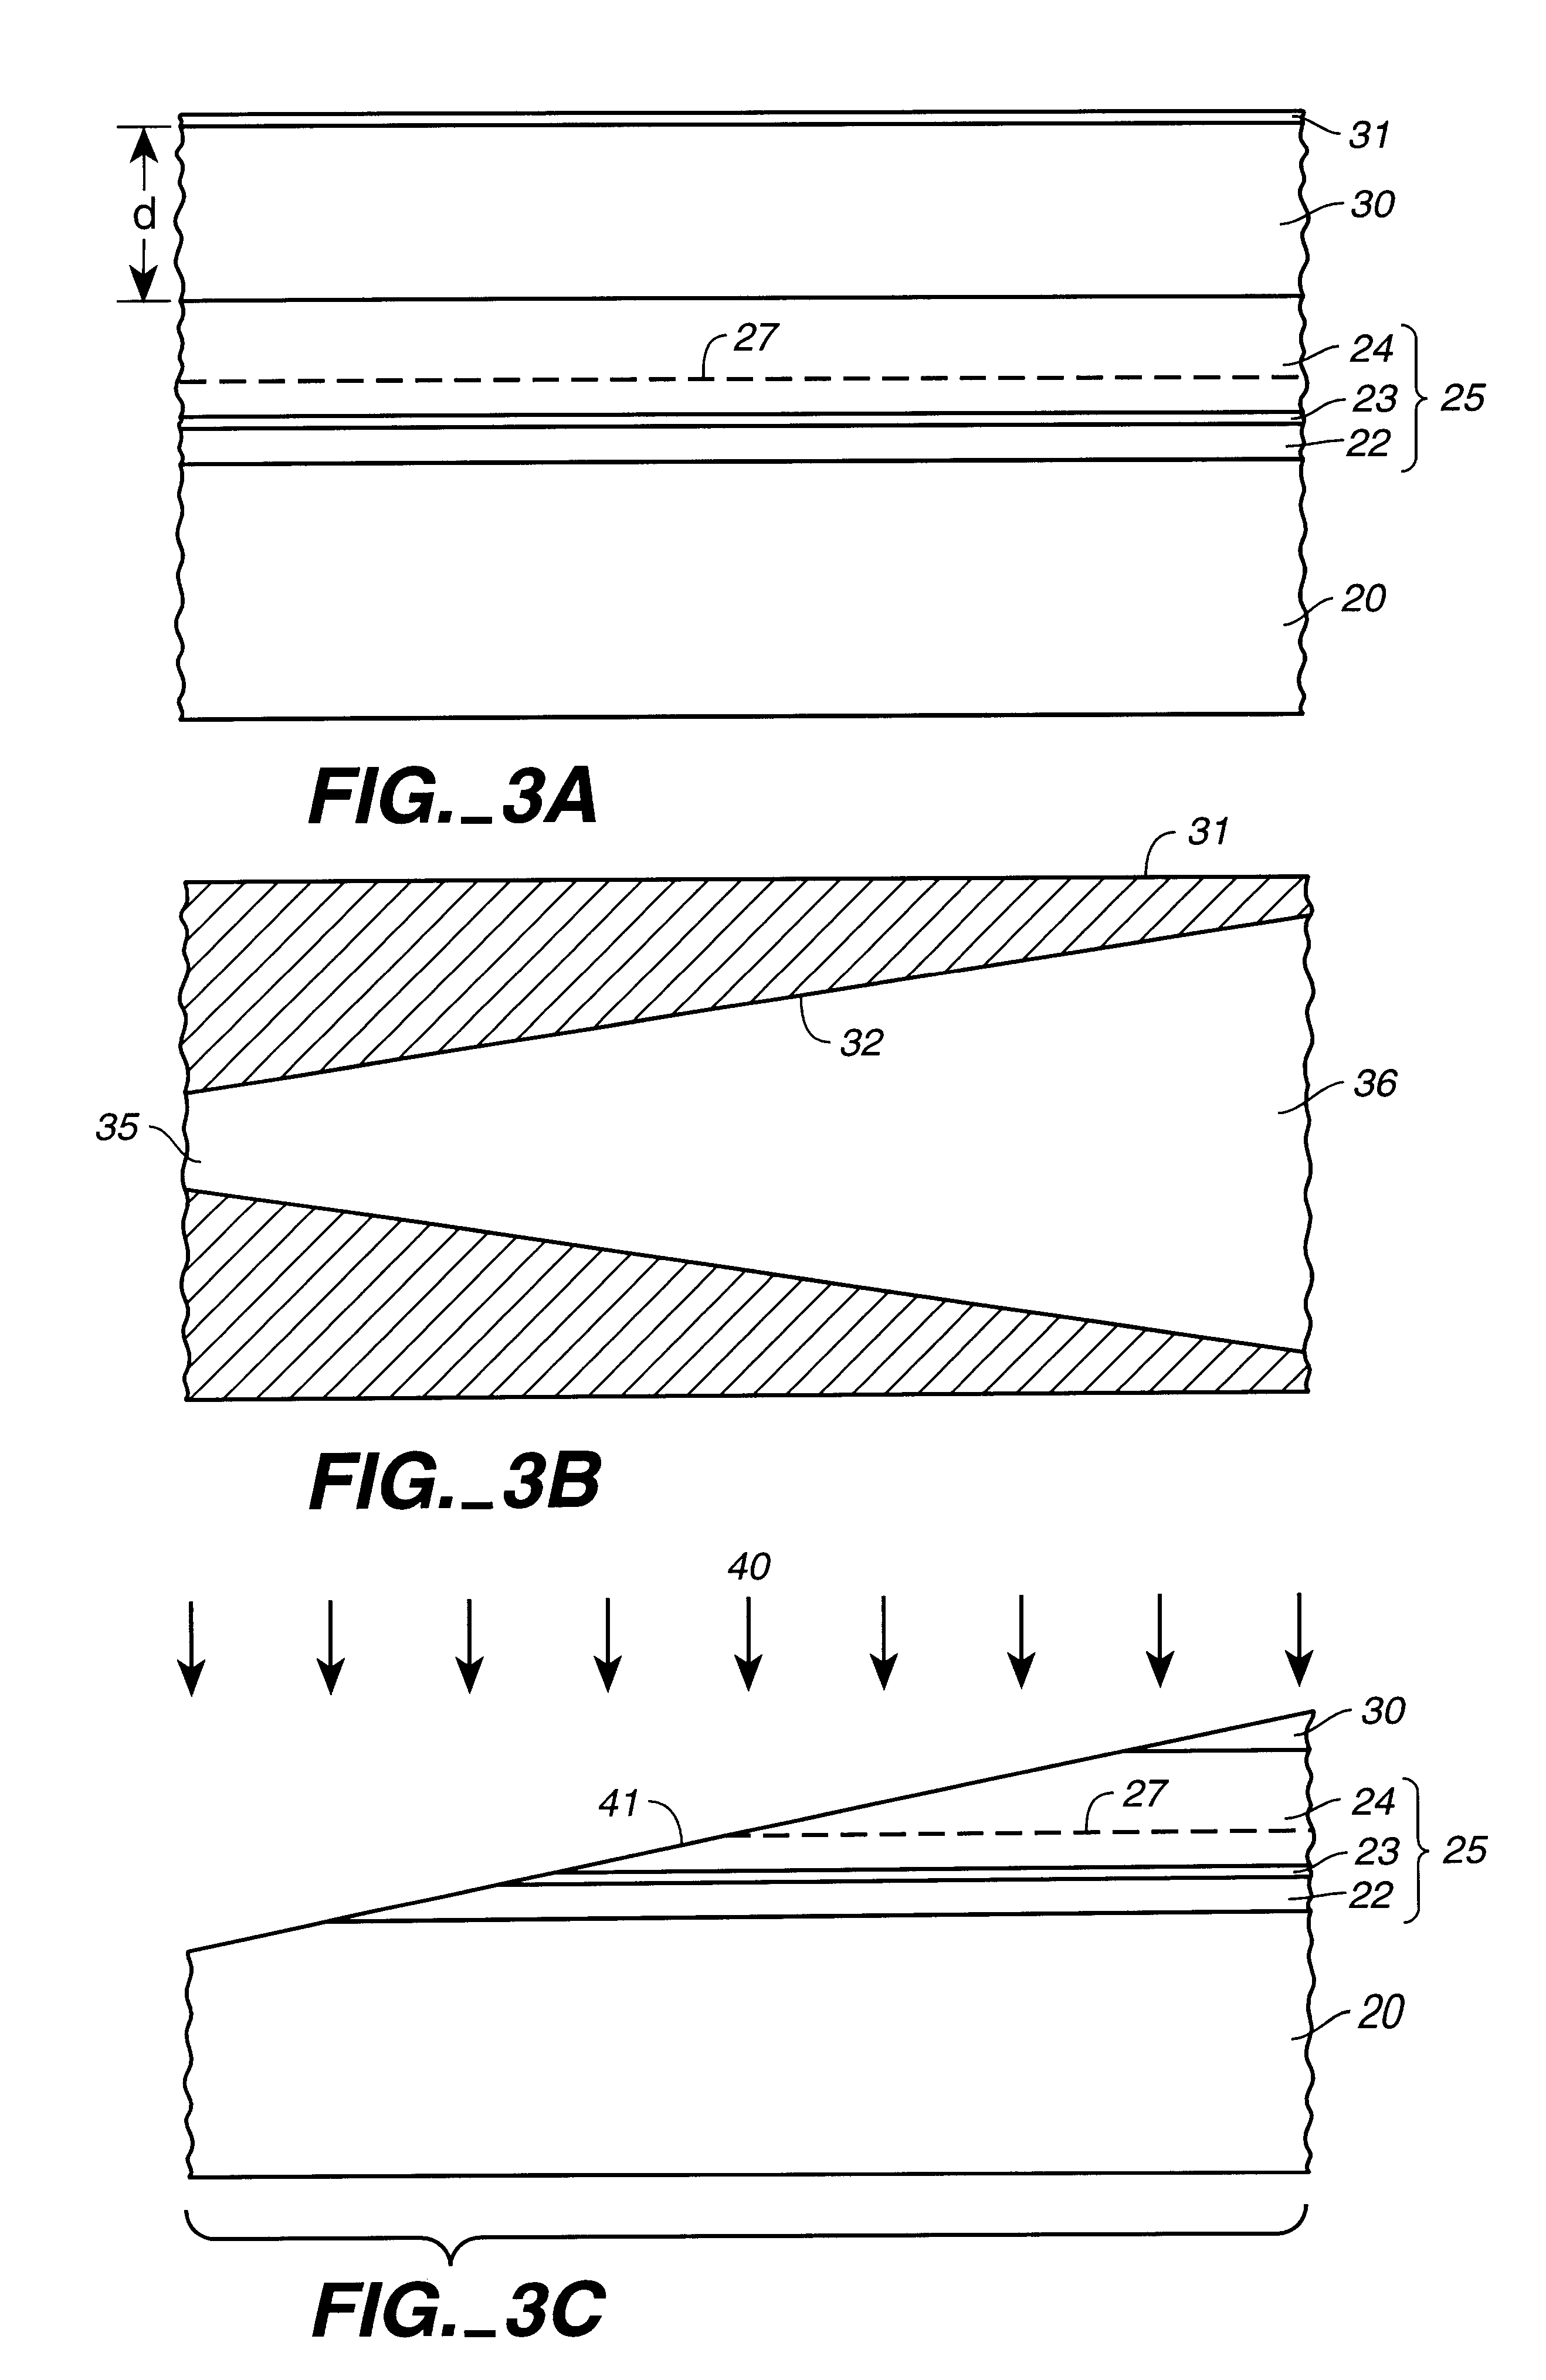 Method of forming a tapered section in a semiconductor device to provide for reproducible mode profile of the output beam